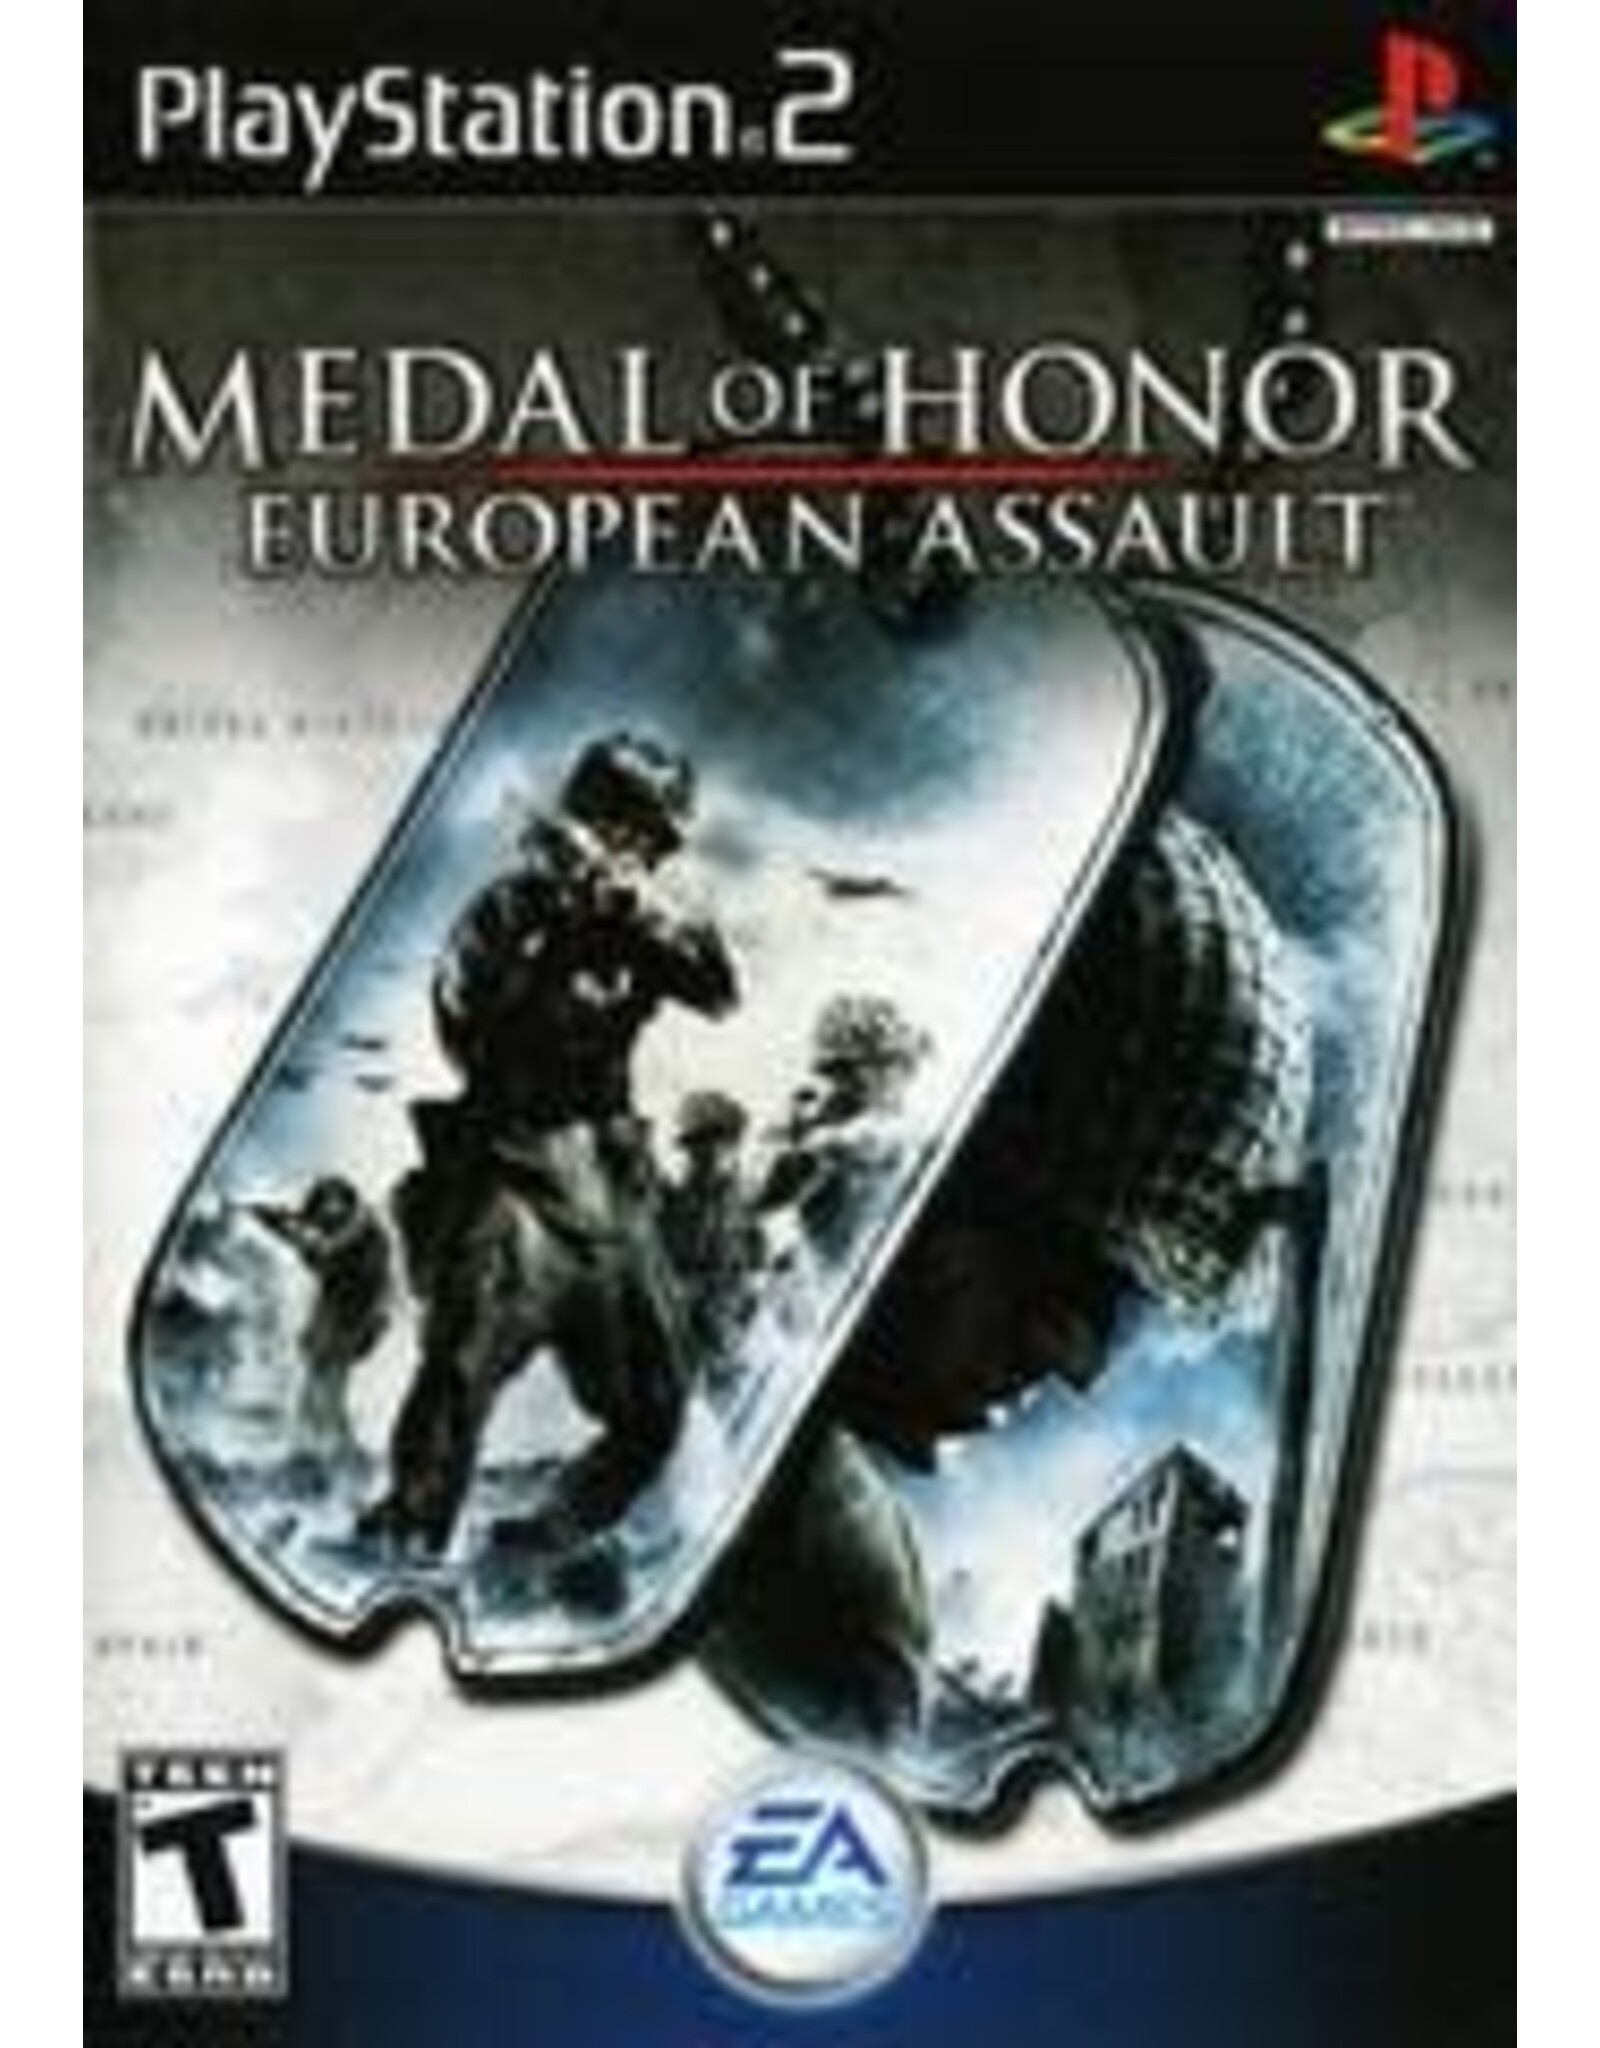 Playstation 2 Medal of Honor European Assault (Used)